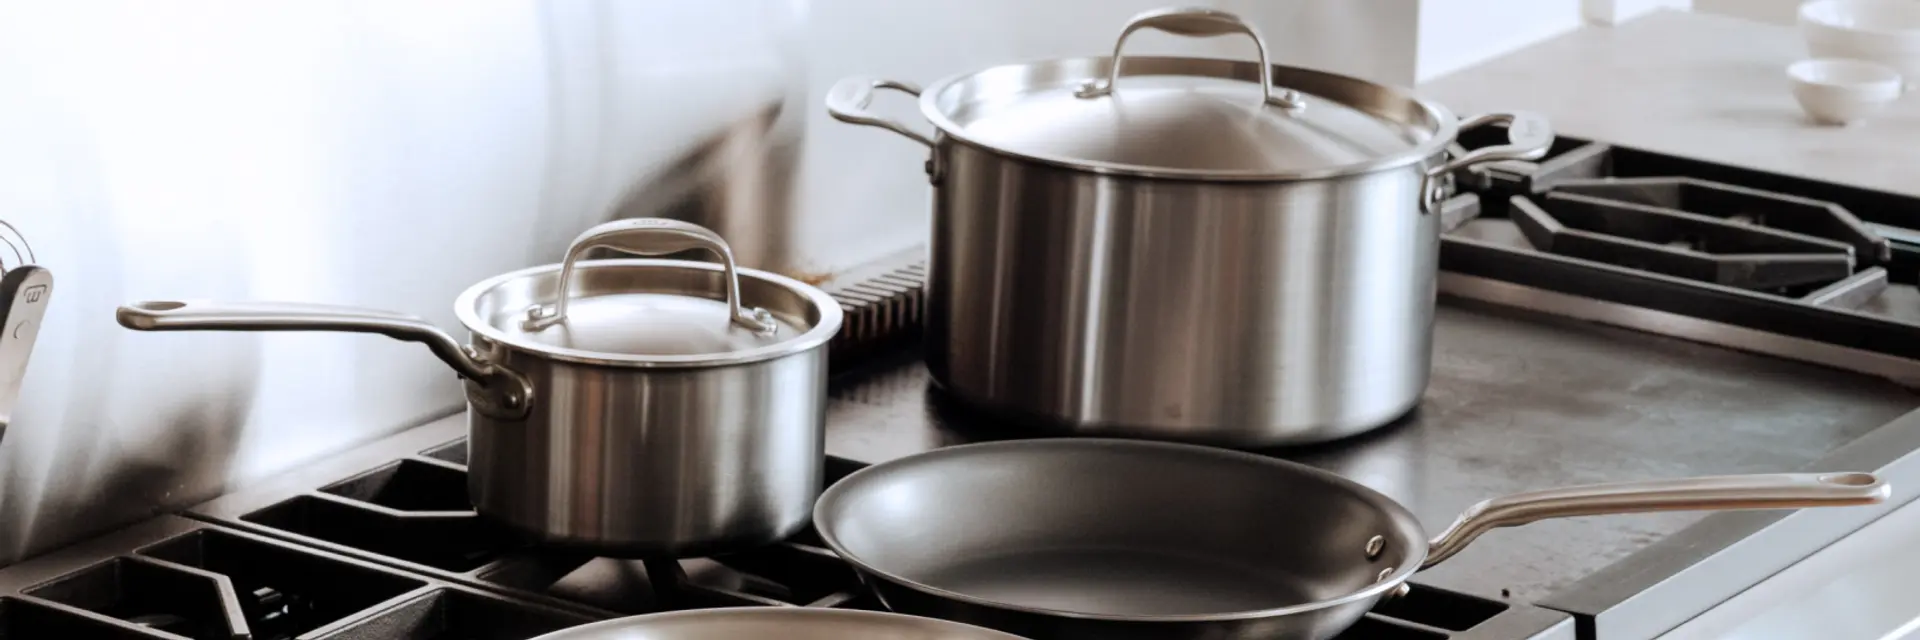 A set of stainless steel cookware, including a frying pan and two pots, sits on a modern stovetop.